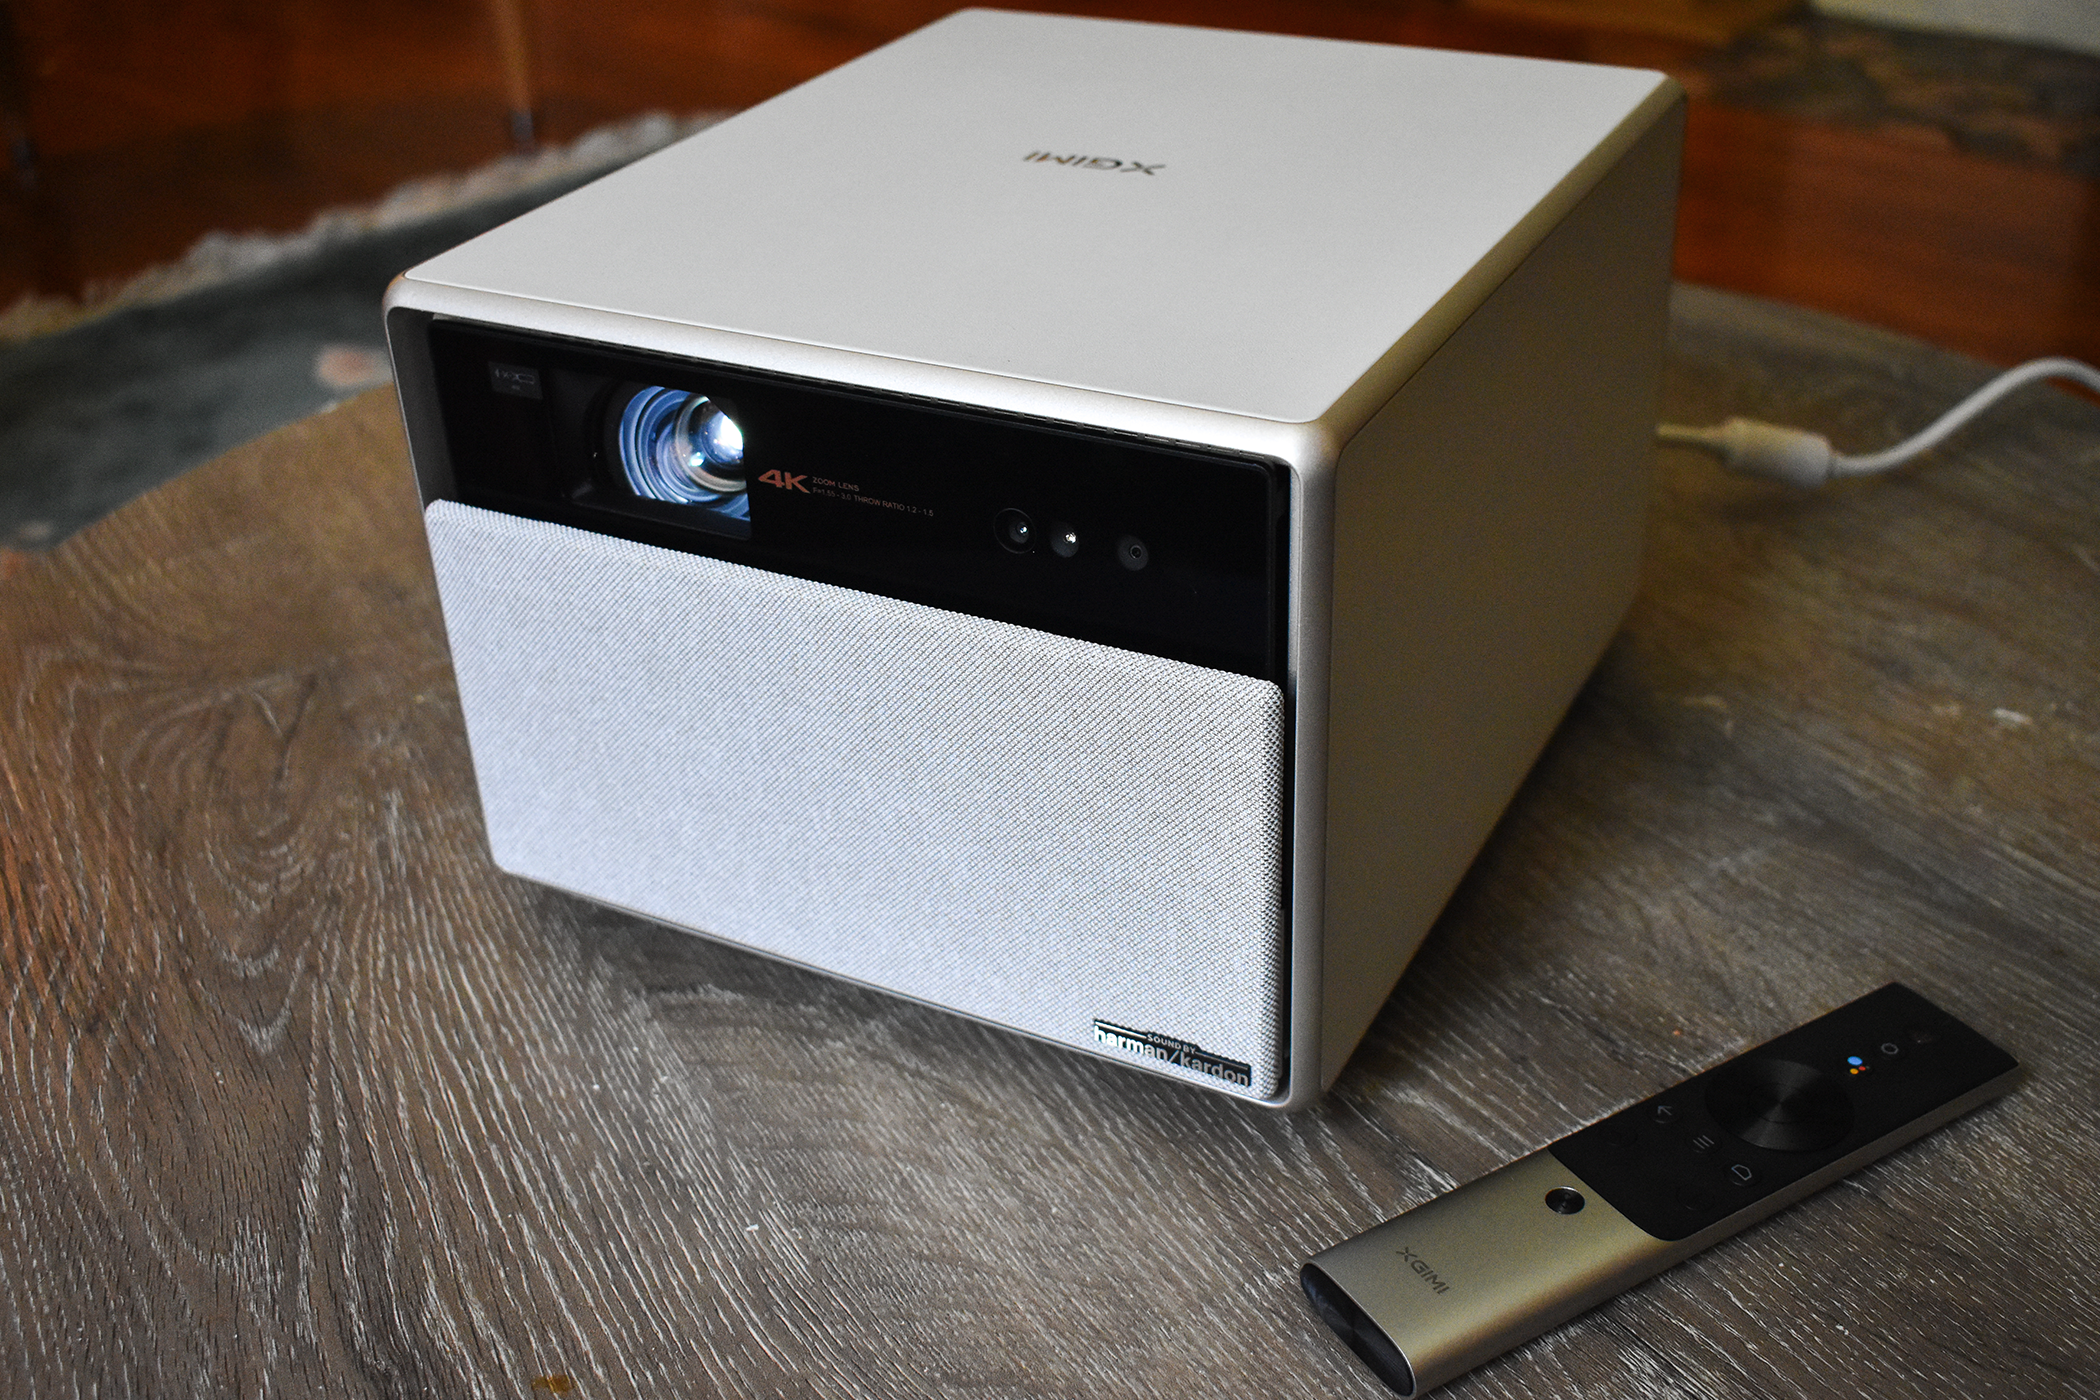 XGIMI Horizon Ultra projector sitting on a table next to its remote